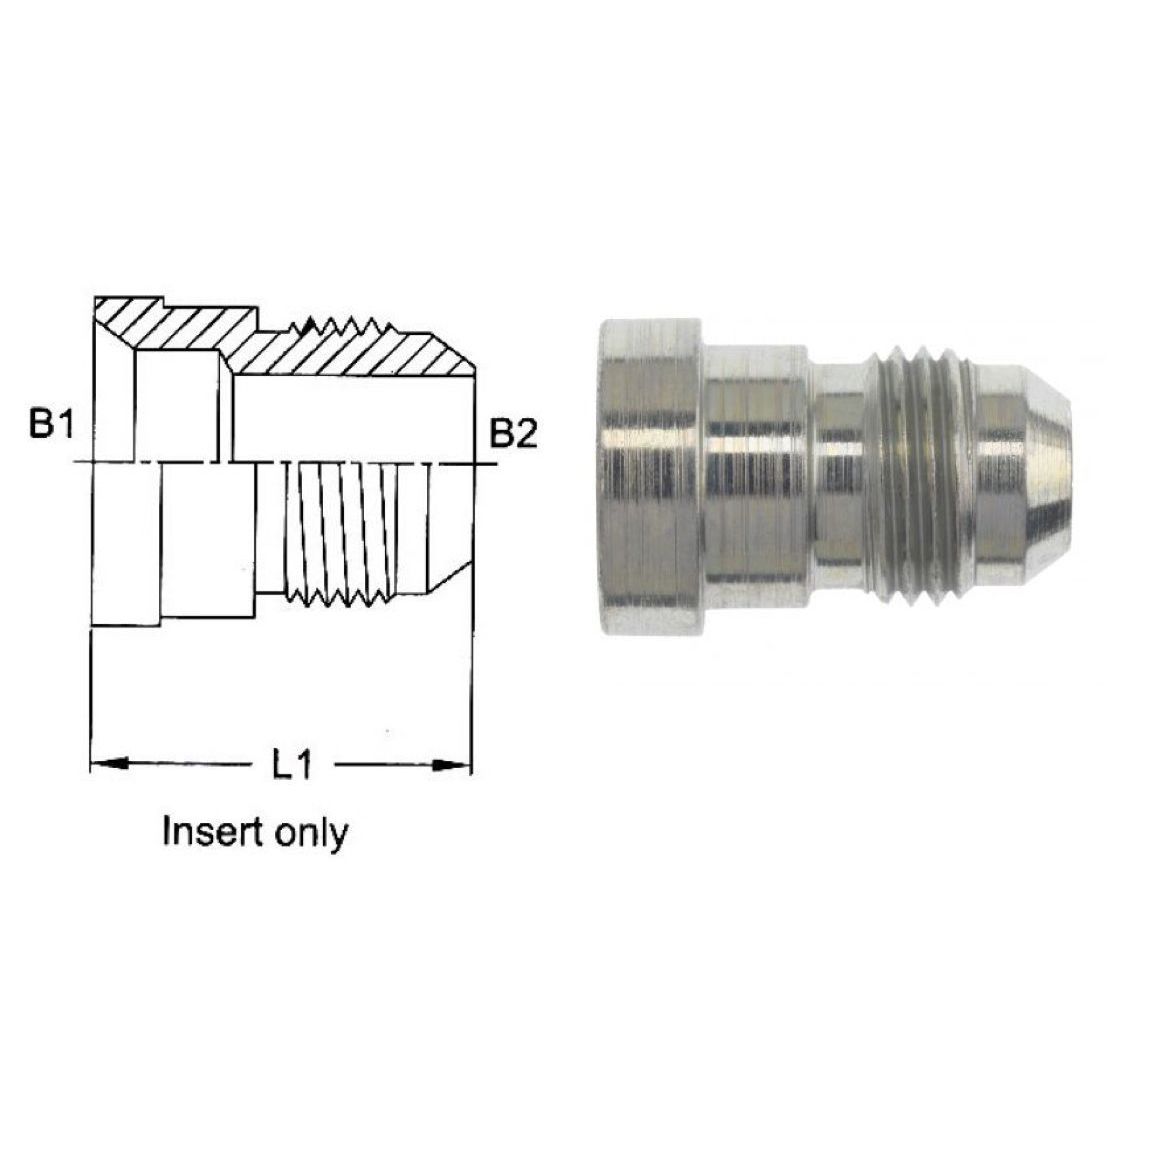 2406-32-08-IN-SS : OneHydraulics Straight Reducer Insert Only, 2 Female JIC x 0.5 (1/2) Male JIC, Stainless Steel, 2400psi